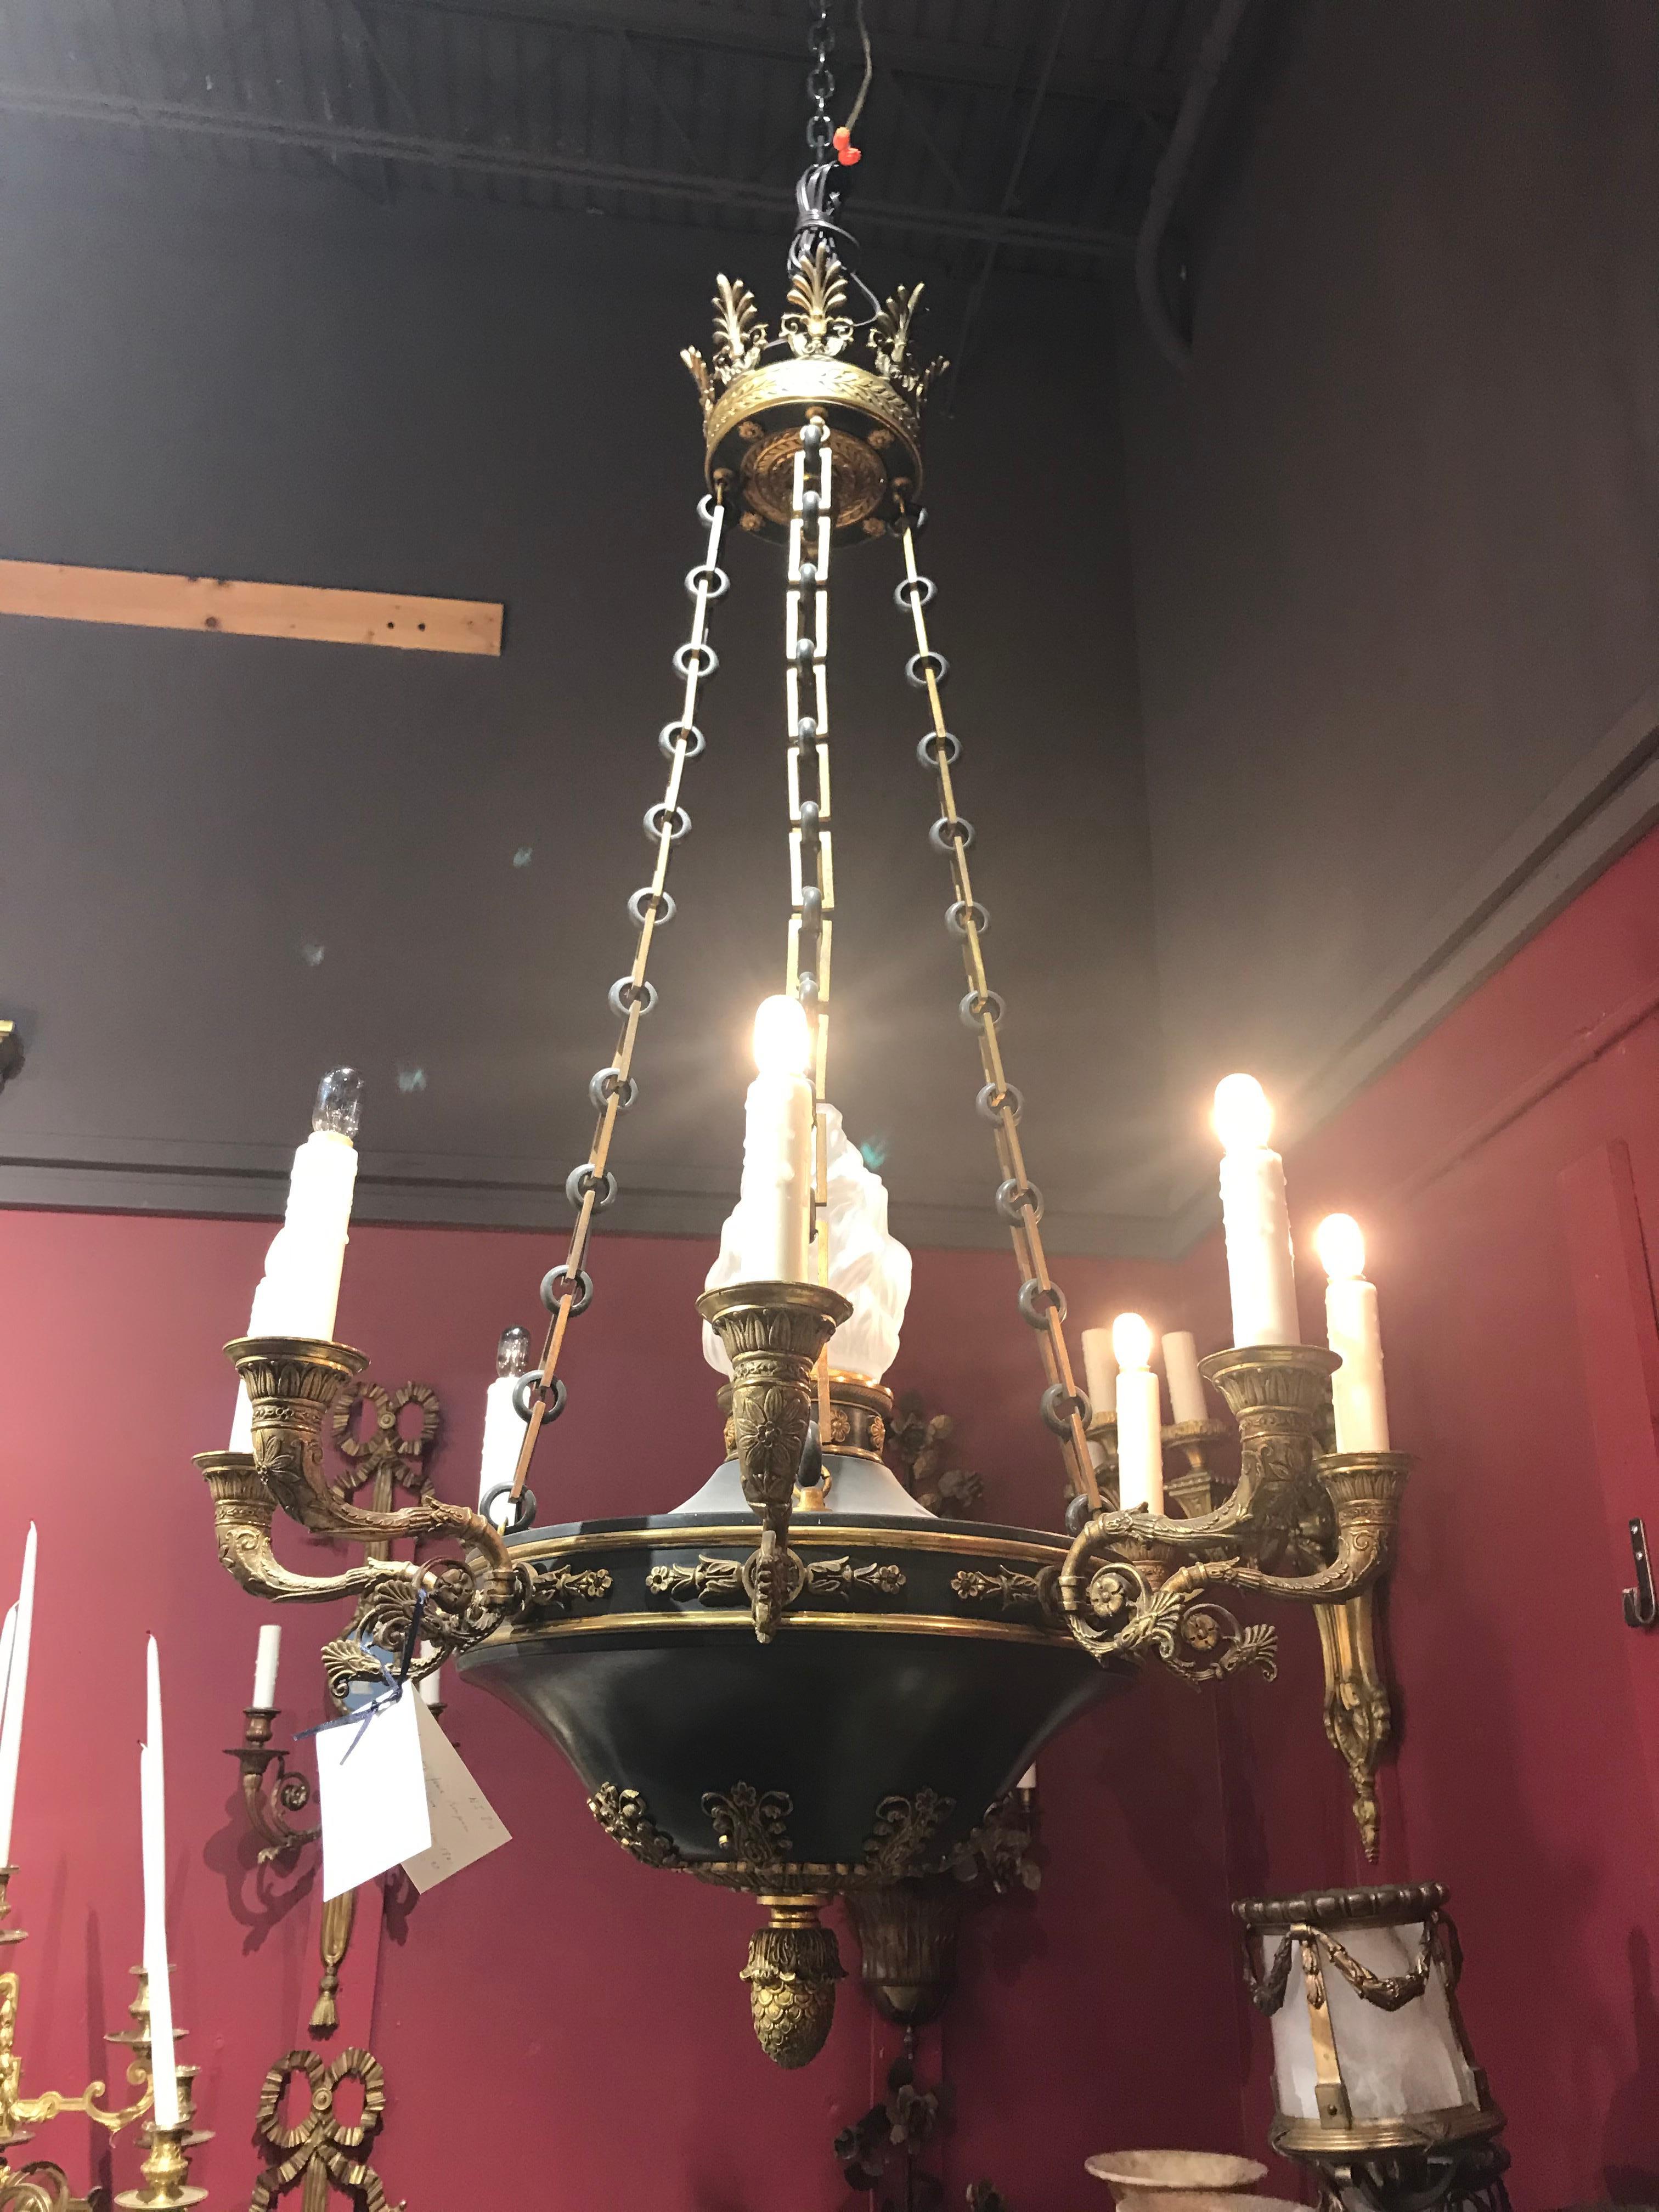 A very fine empire style chandelier. Gilt and patinated bronze body and chains, featuring crystal flame globe. 8 lights, France, circa 1900.
Dimensions: Height 44